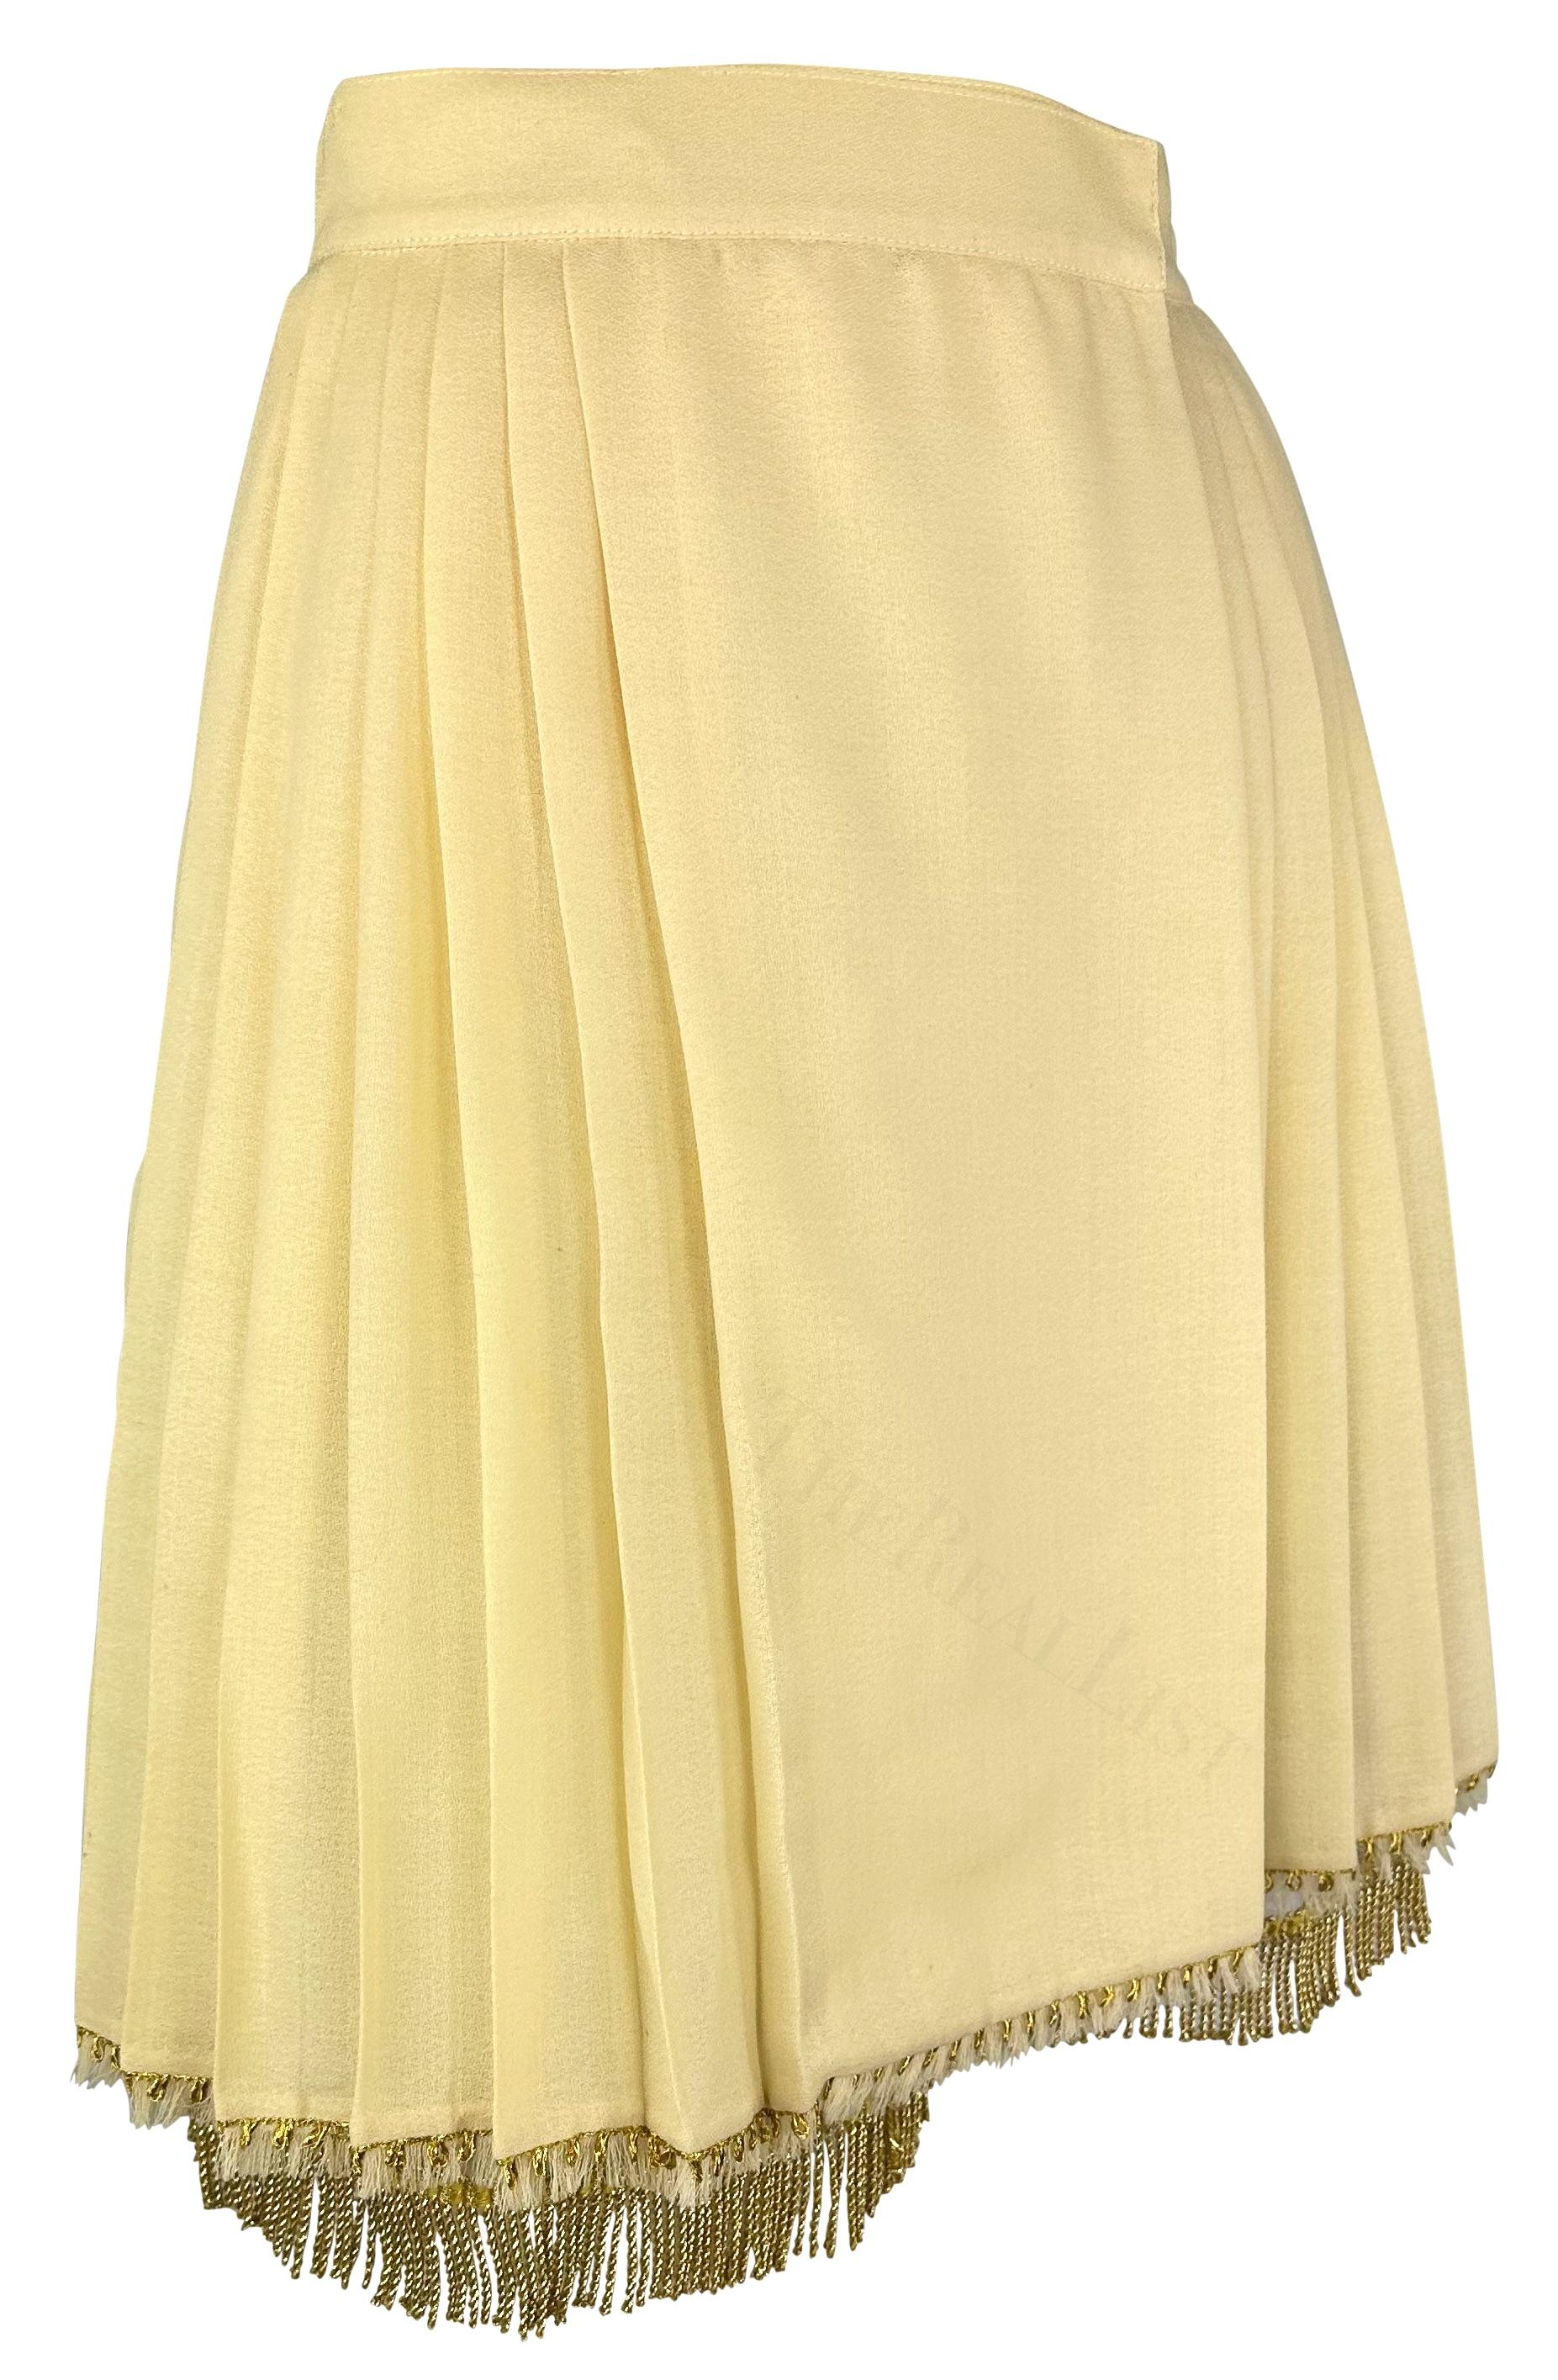 S/S 1992 Gianni Versace Couture Off-White Pleat Wrap Fringe Skirt Crinoline Set For Sale 3